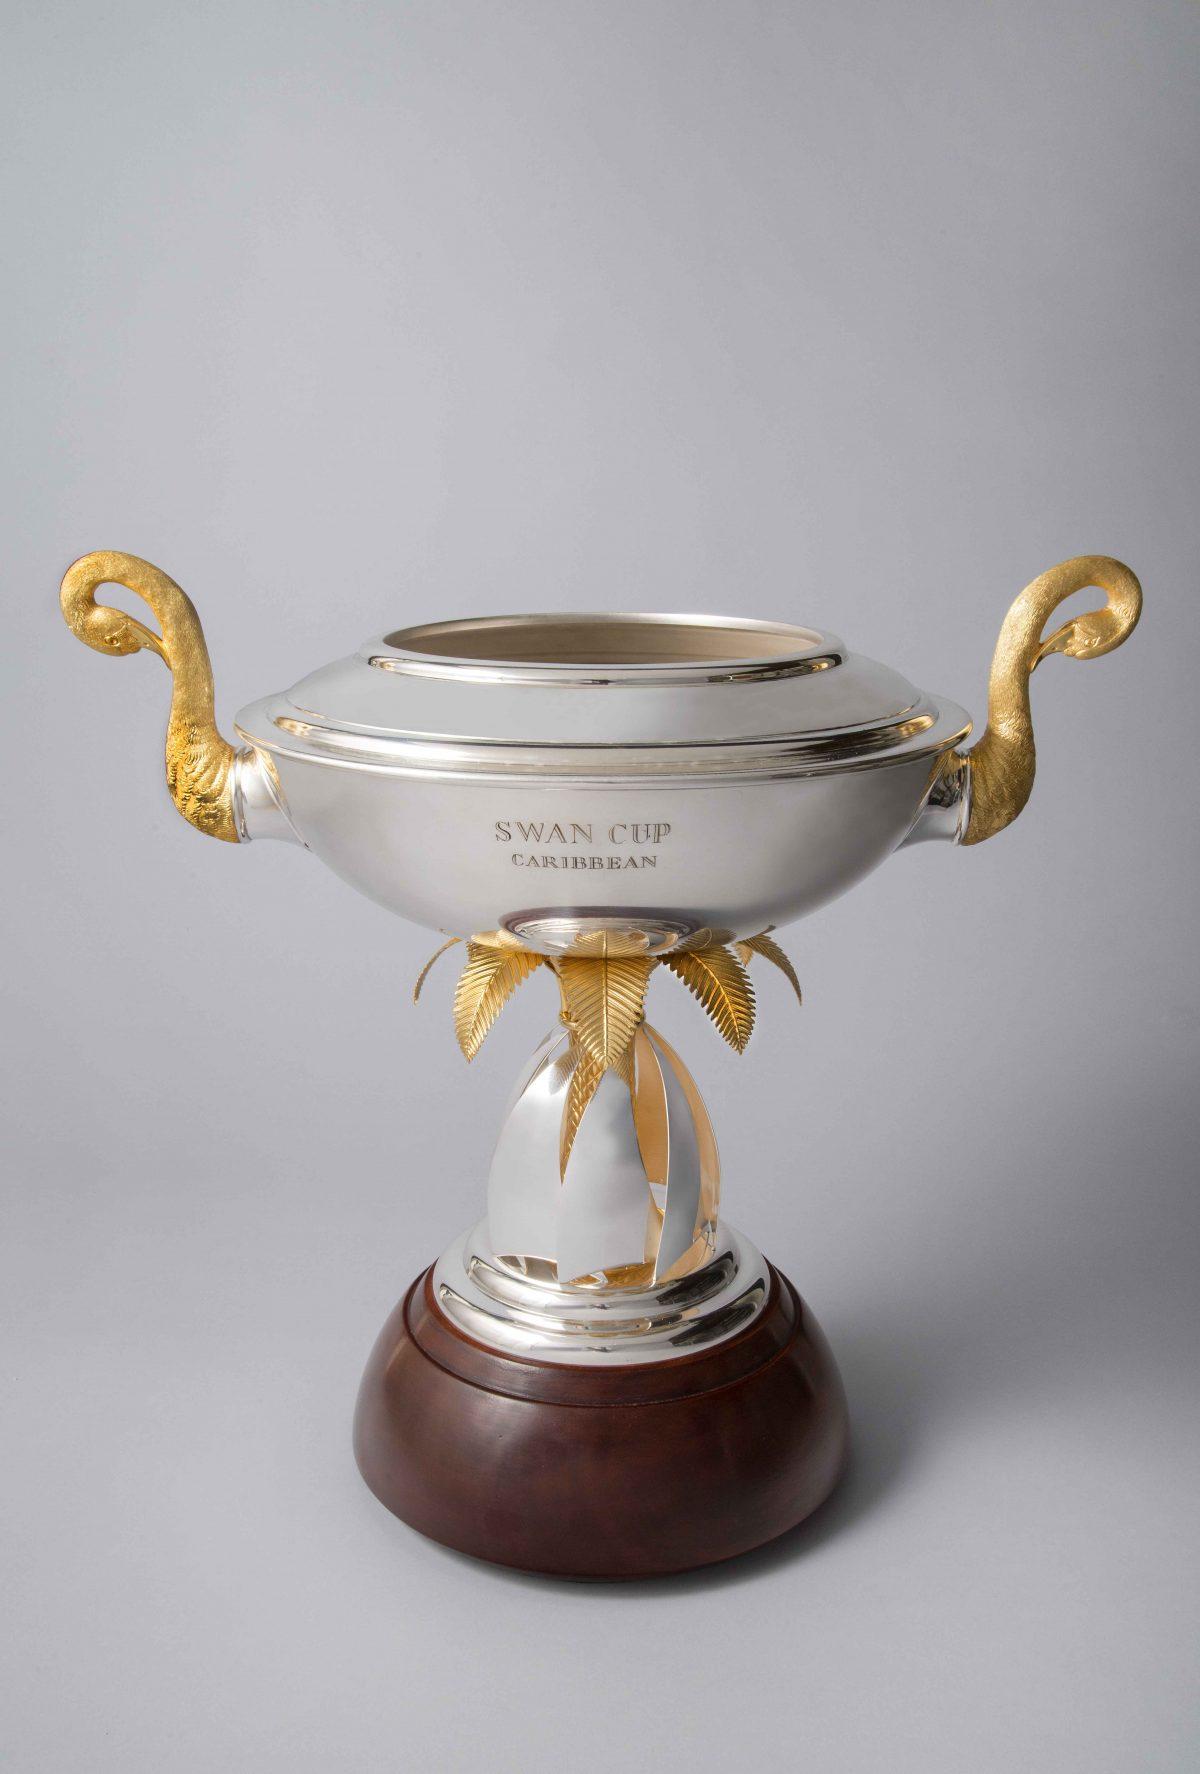 The Swan cup, inspired by Aspreys of London. (Lorenzo Michelini/Argentiere Pagliai)